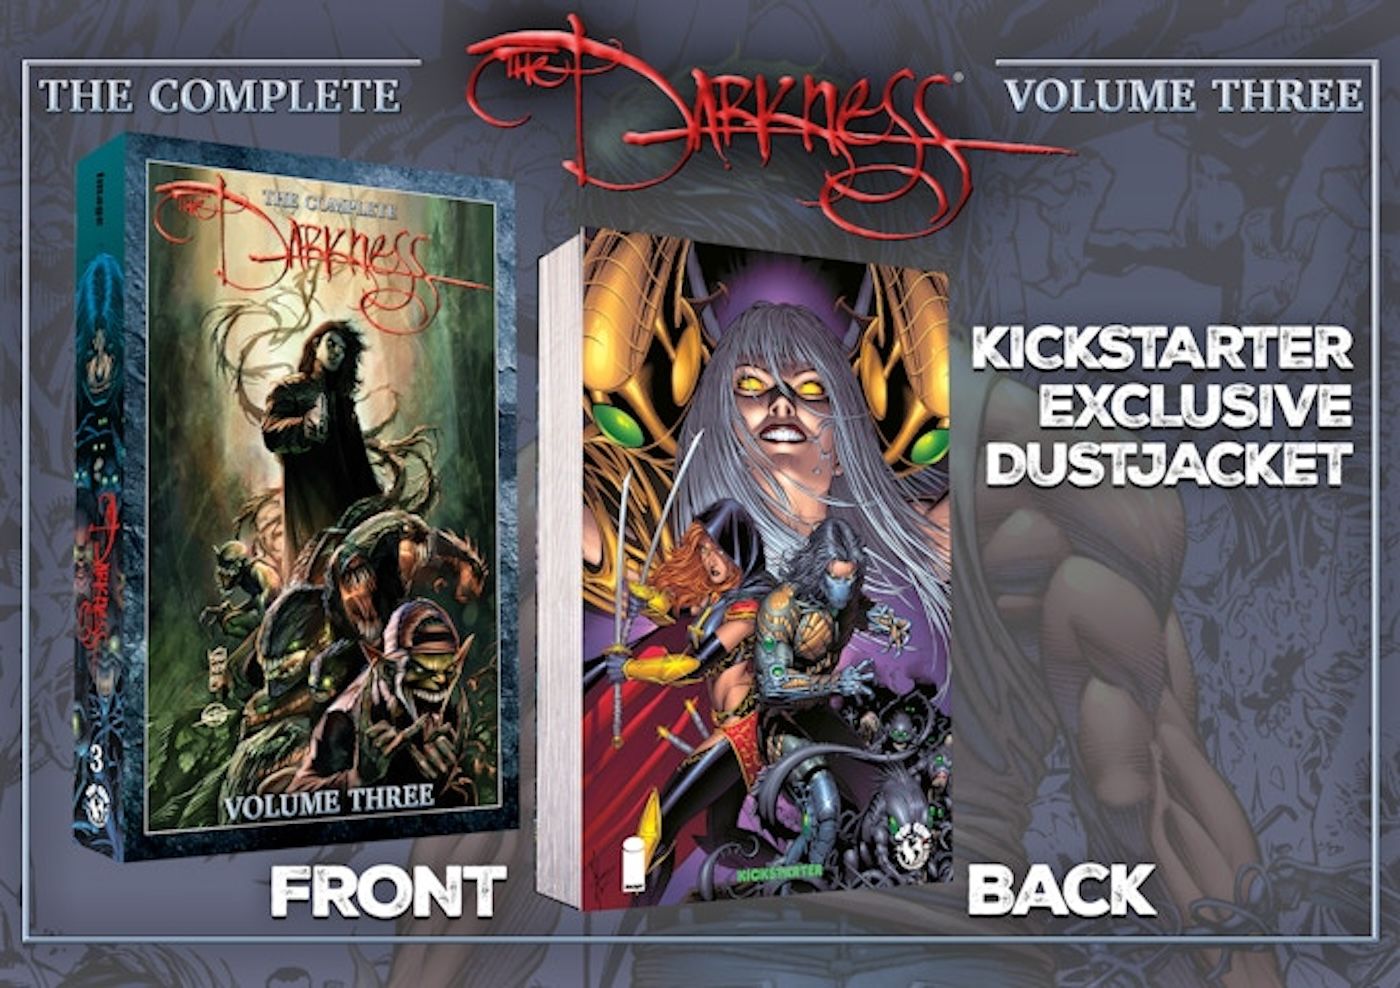 “My All-Time Favorite Comic Anti-Hero”: Top Cow’s THE DARKNESS Kickstarter Campaign Includes New Marc Silvestri Art